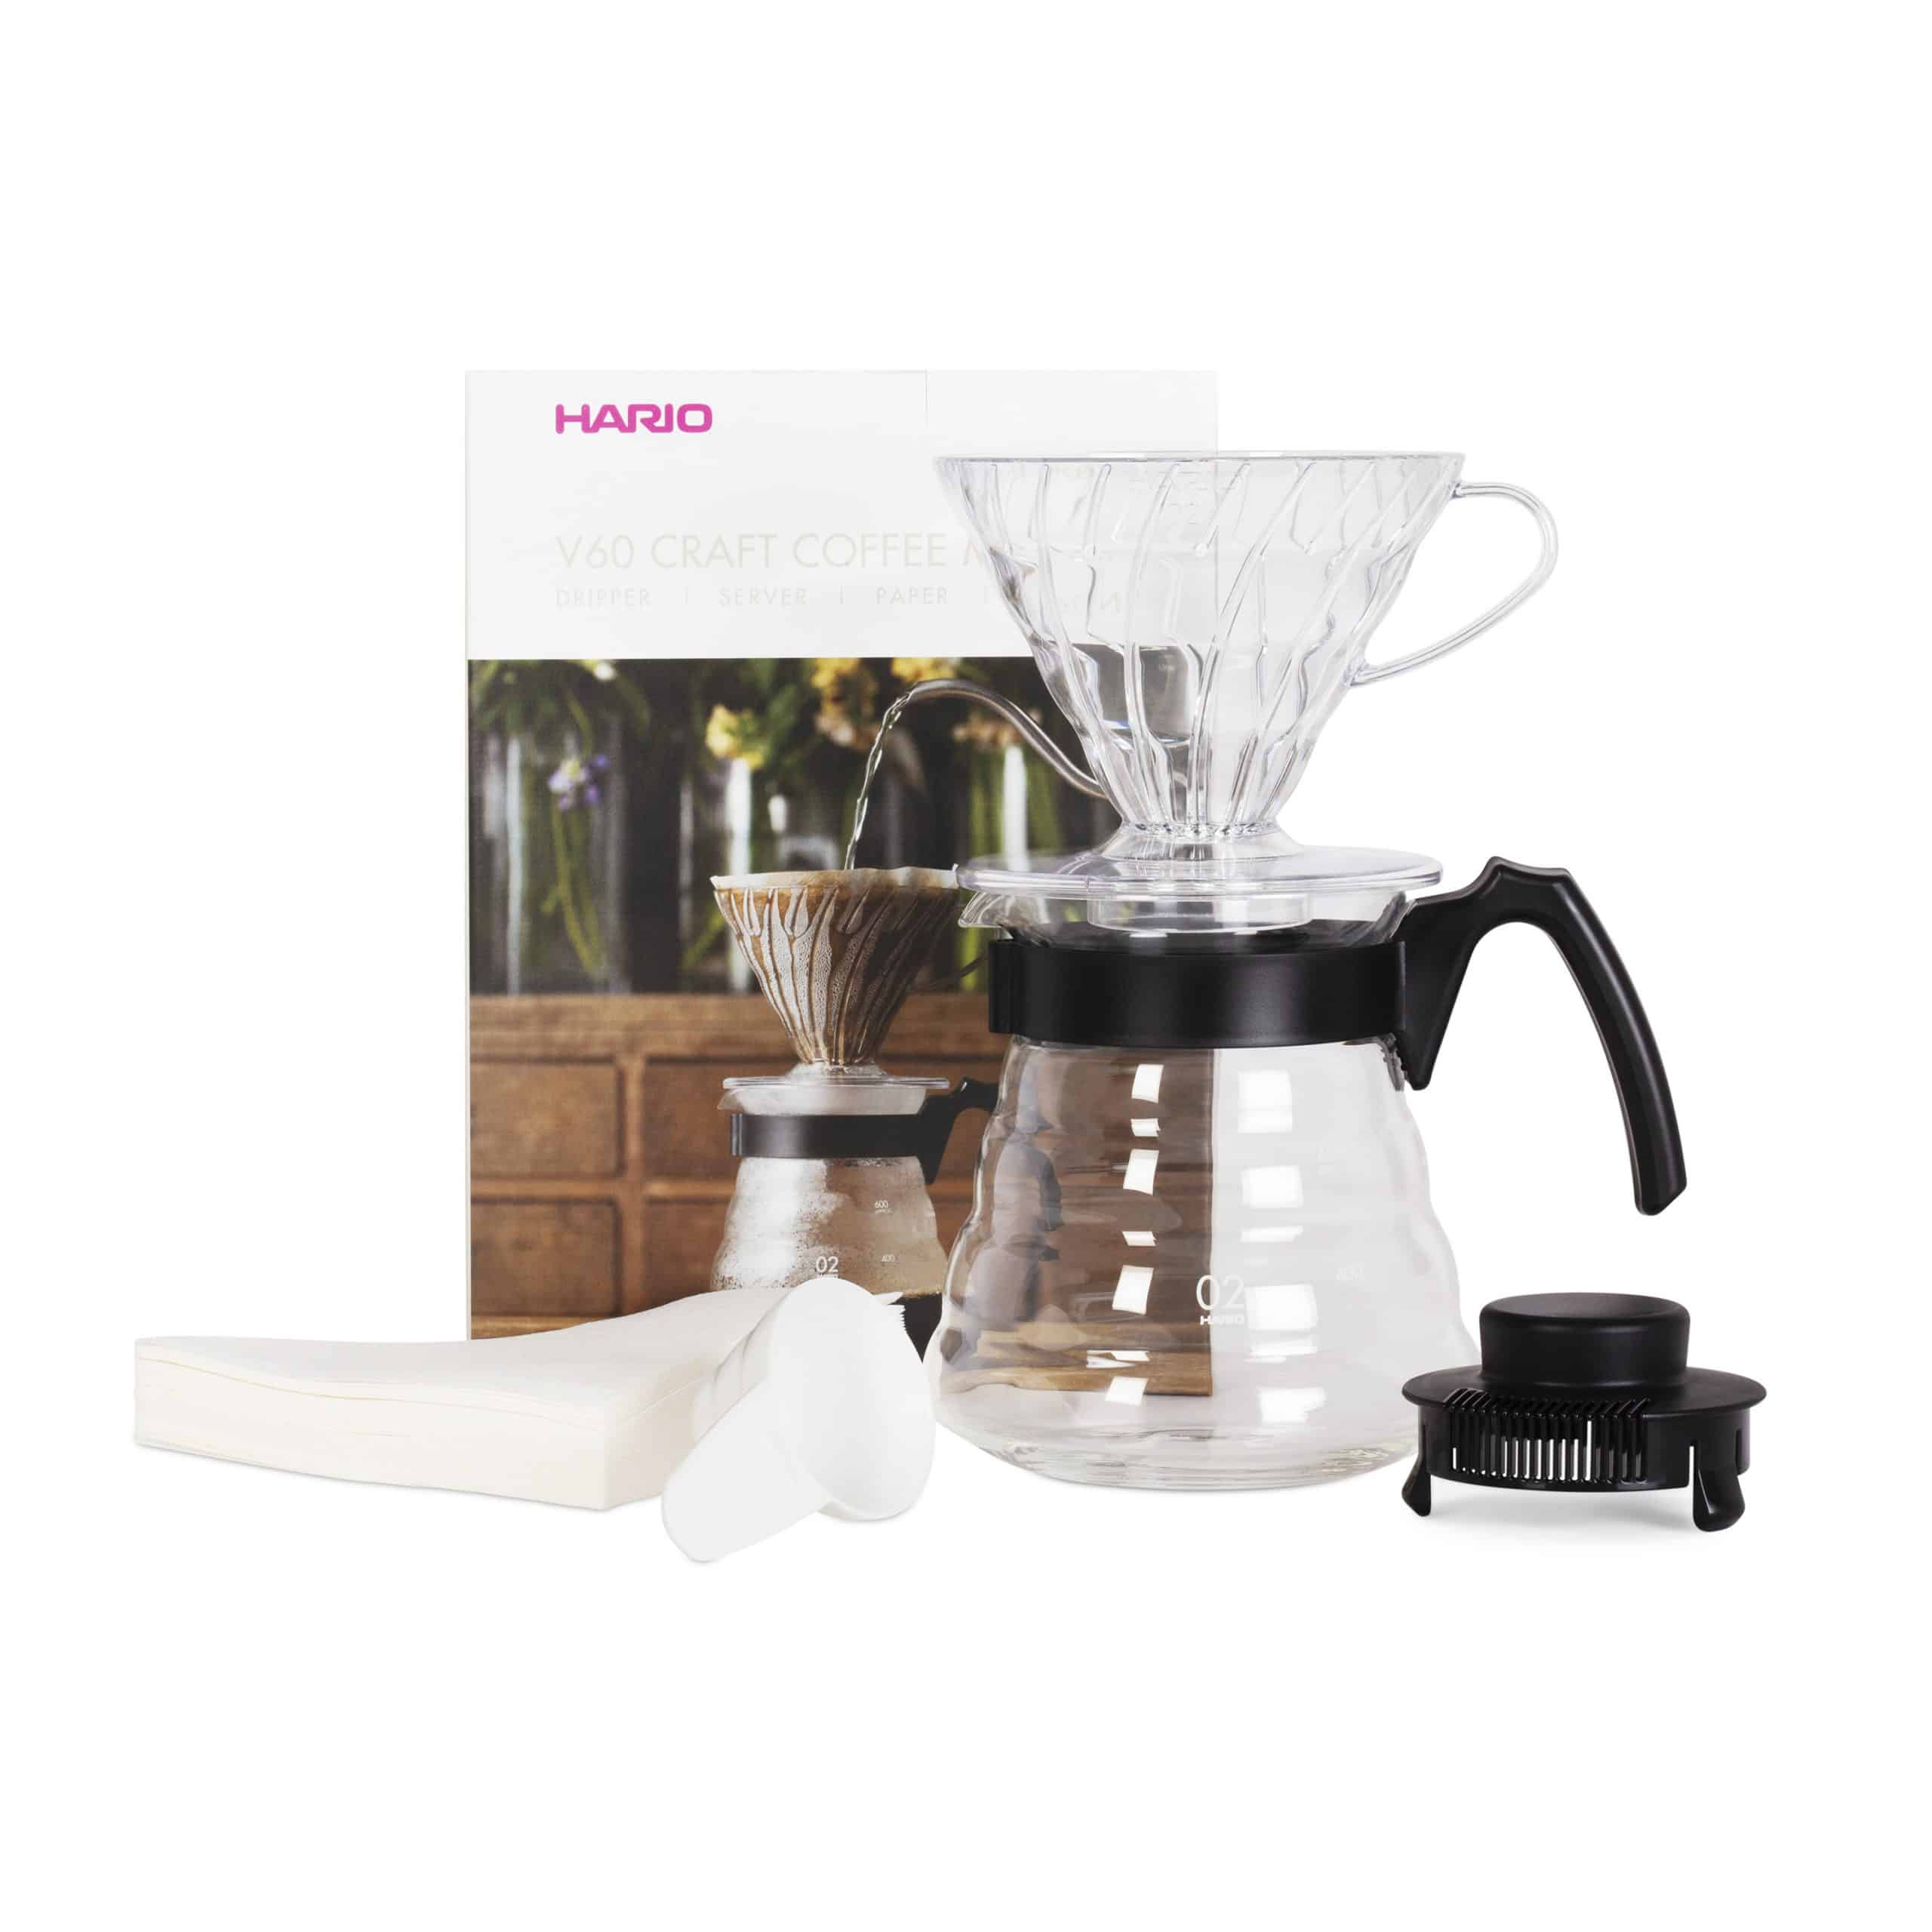 Specialiseren viool Lucht Hario V60 Craft Coffee Maker - Cofmos Coffee Roasters